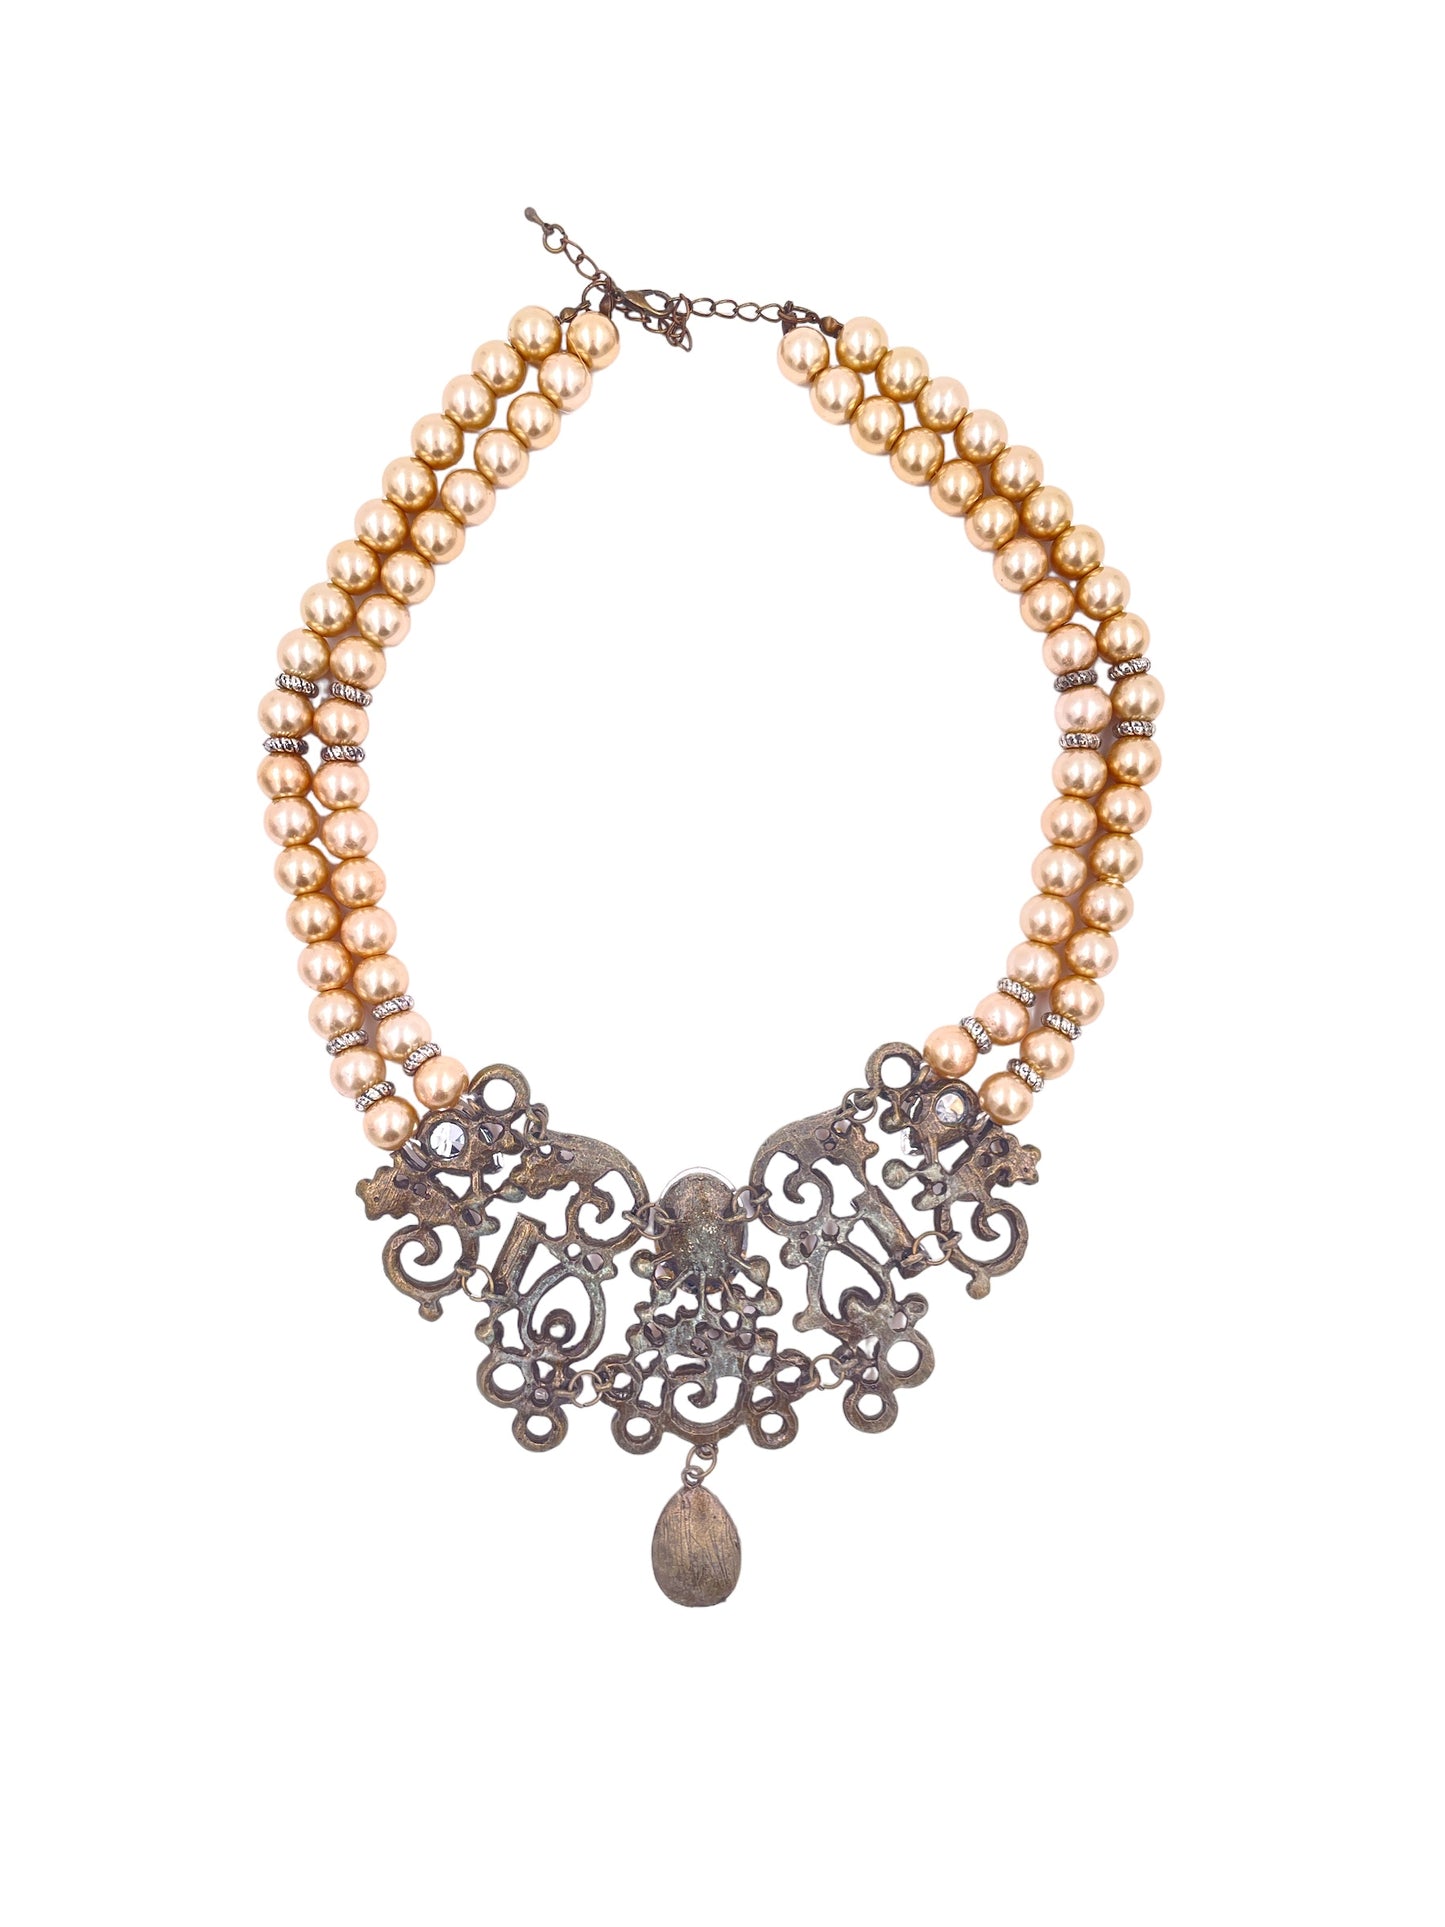 Double Strand Pearl Necklace with Crystal Collar